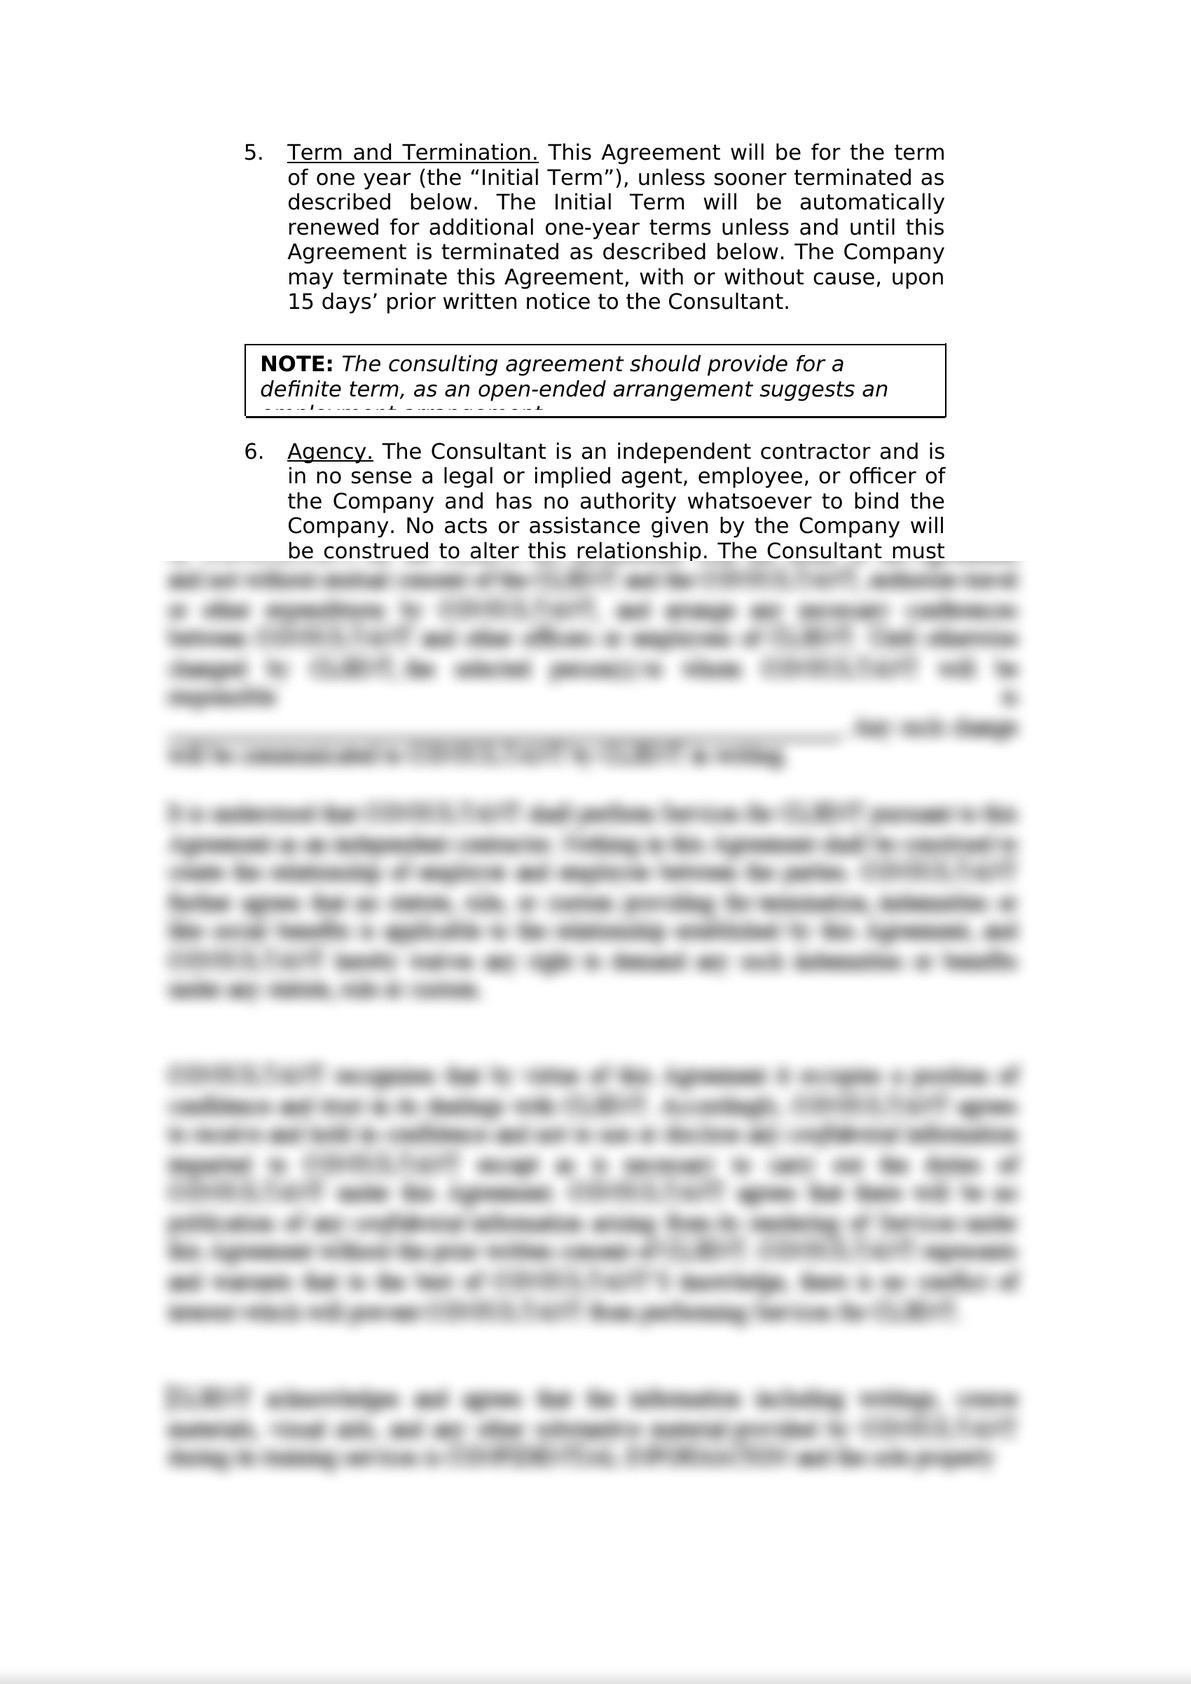 Consulting Agreement-3